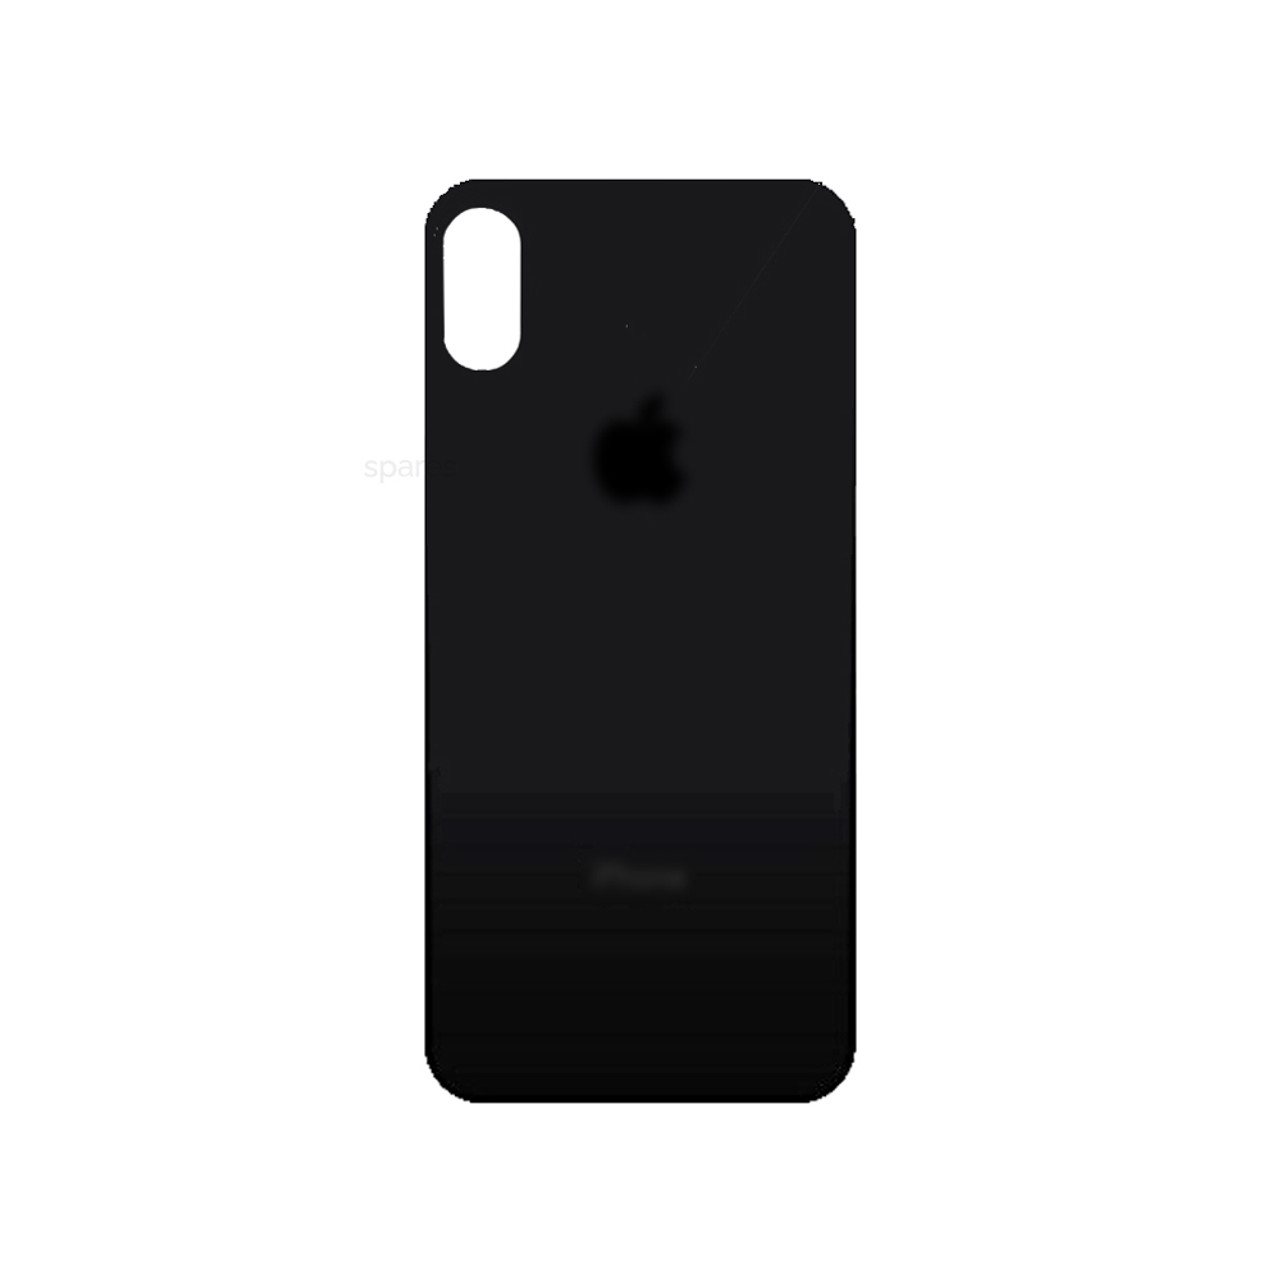 iPhone X Rear Back Glass With Big Camera Hole Space Grey Replacement